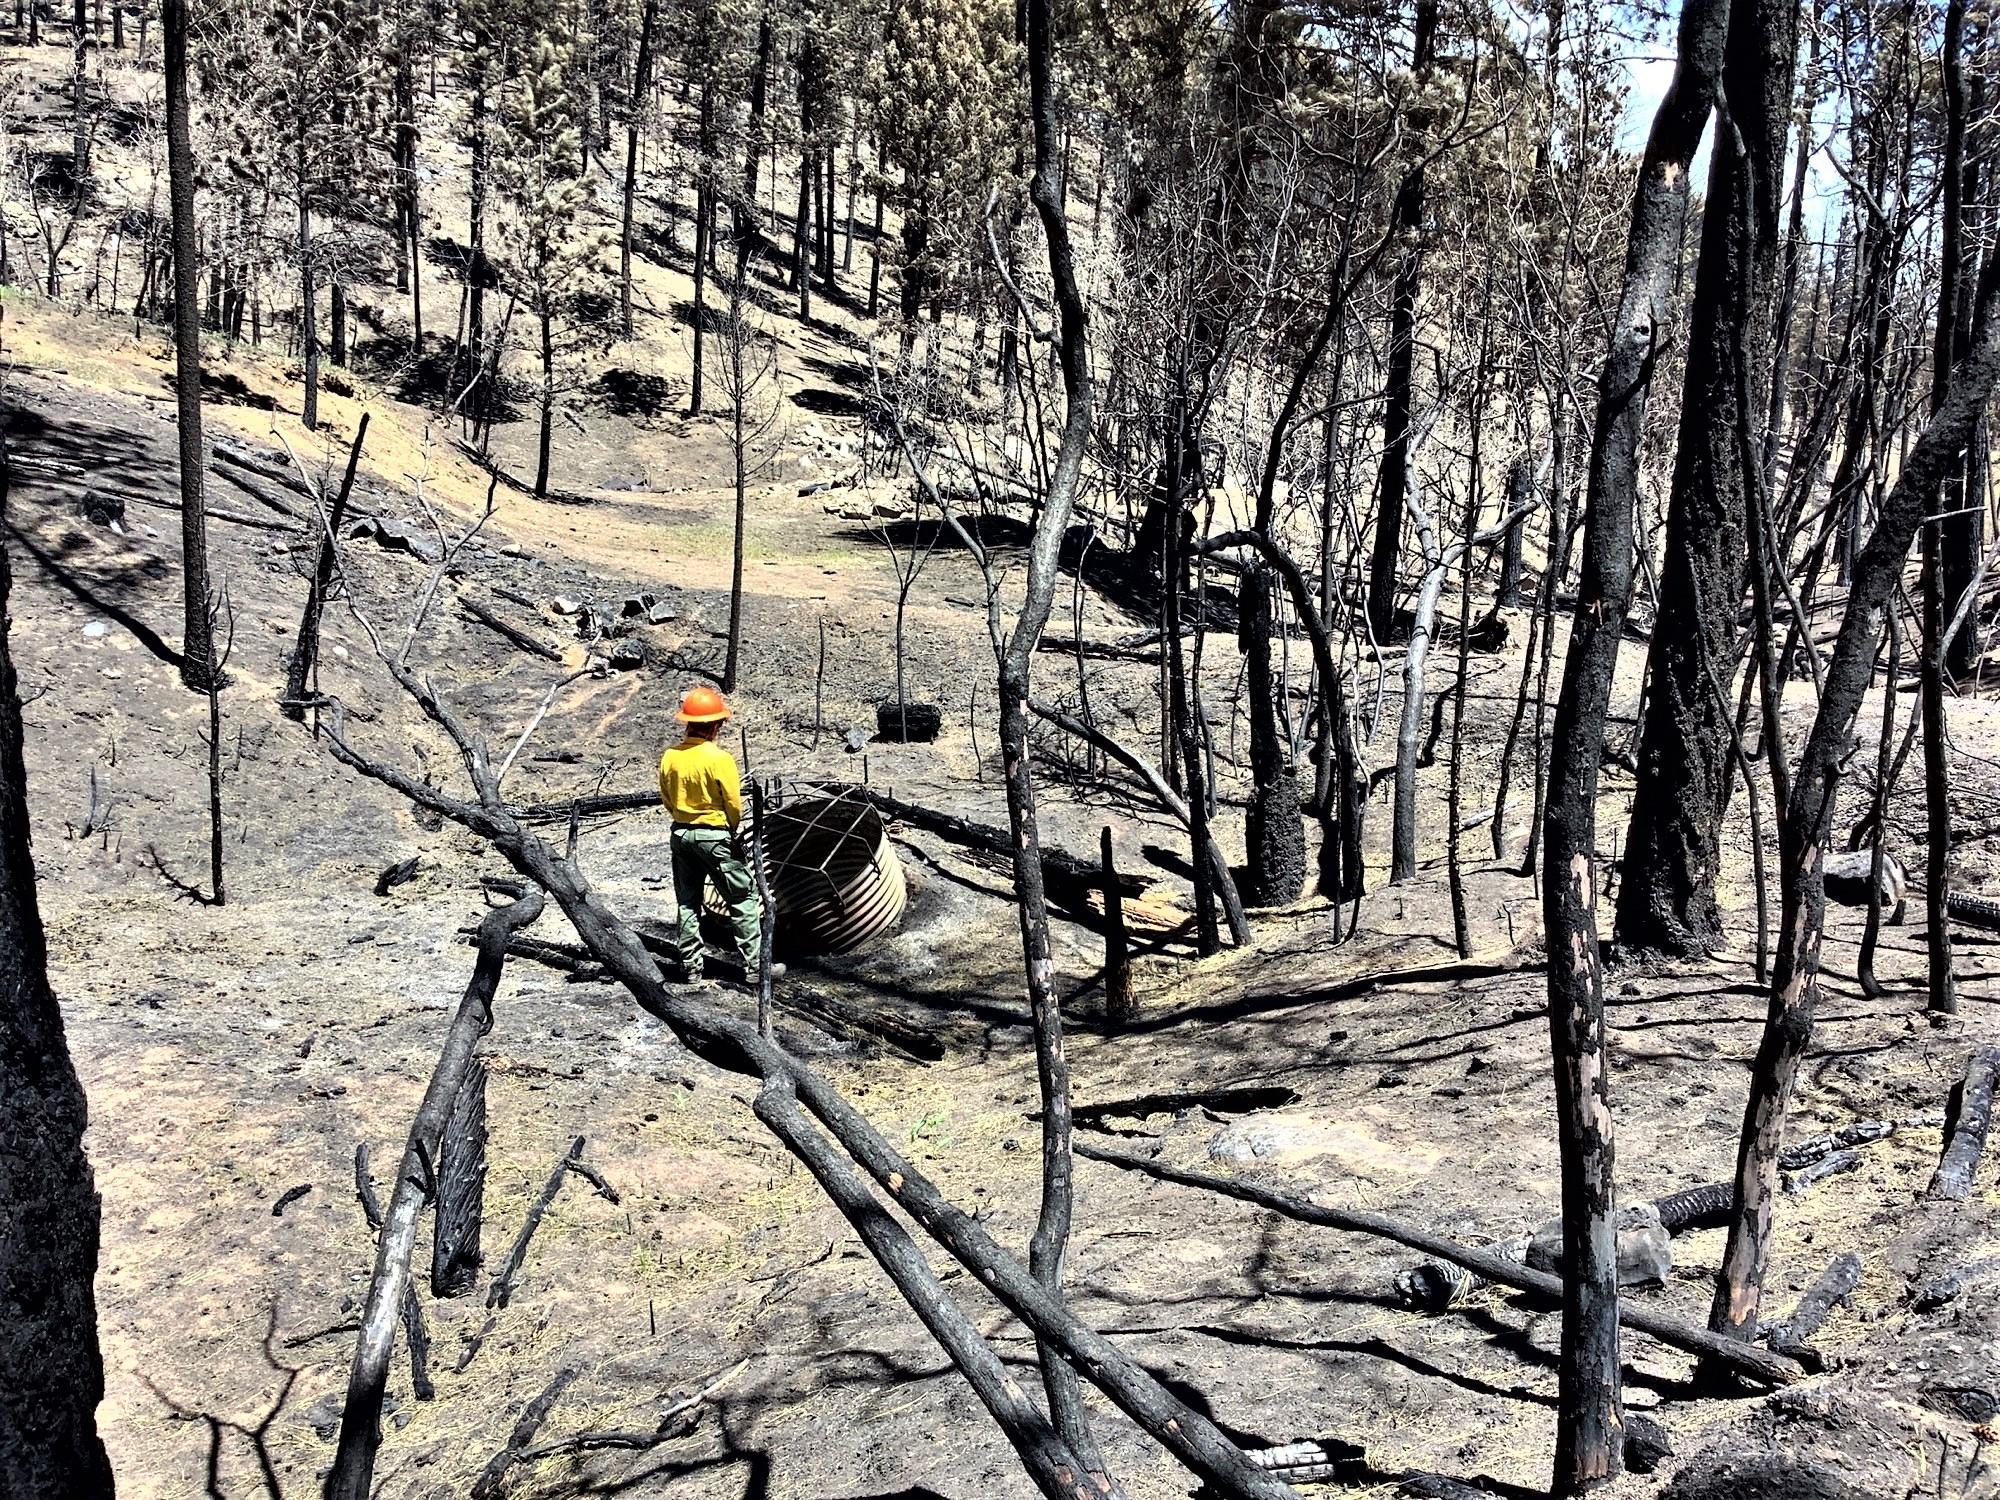 Image showing BAER specialists Assessing Forest Service NFSR 263 Road in Gallinas Canyon Burned Area